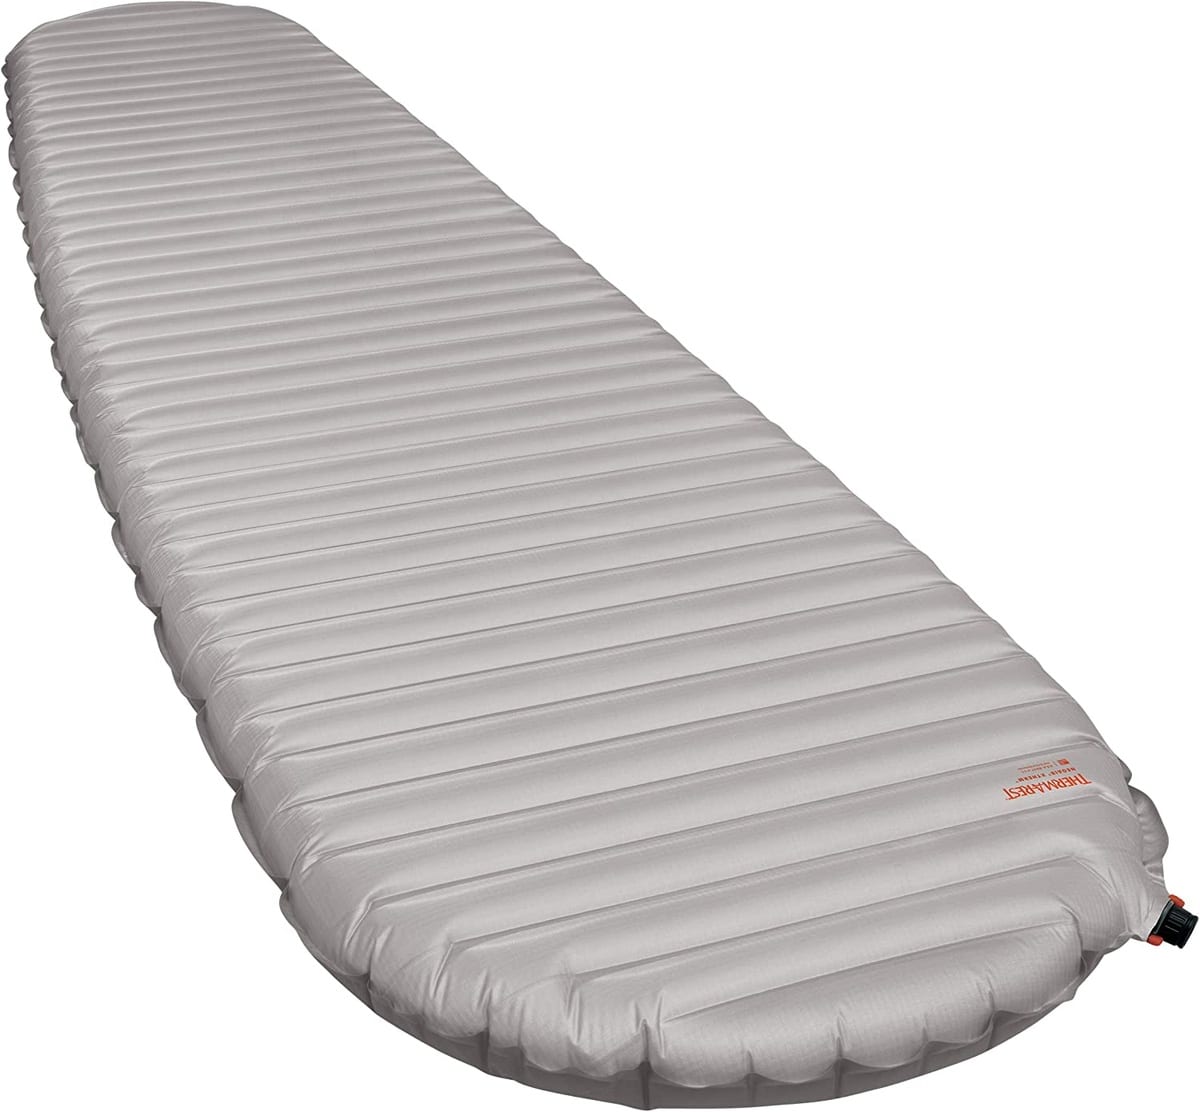 therm-a-rest self-inflating camping mat